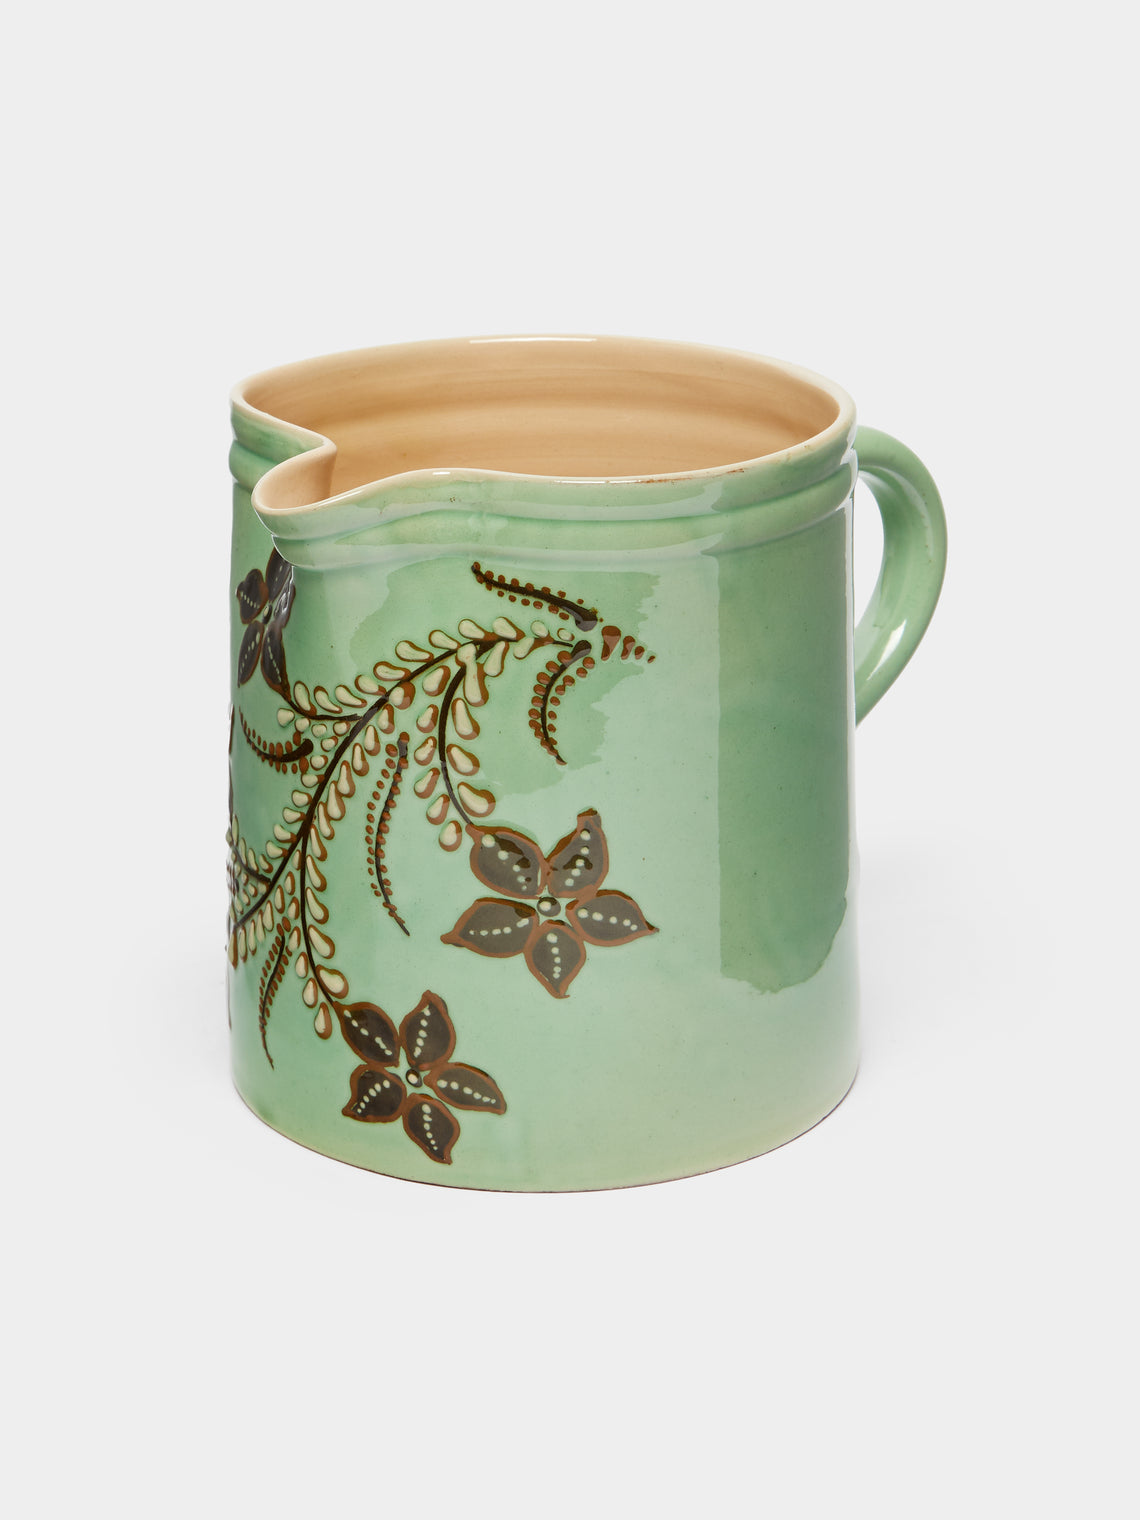 Poterie d’Évires - Flowers Hand-Painted Ceramic Straight-Edge Jug -  - ABASK - 